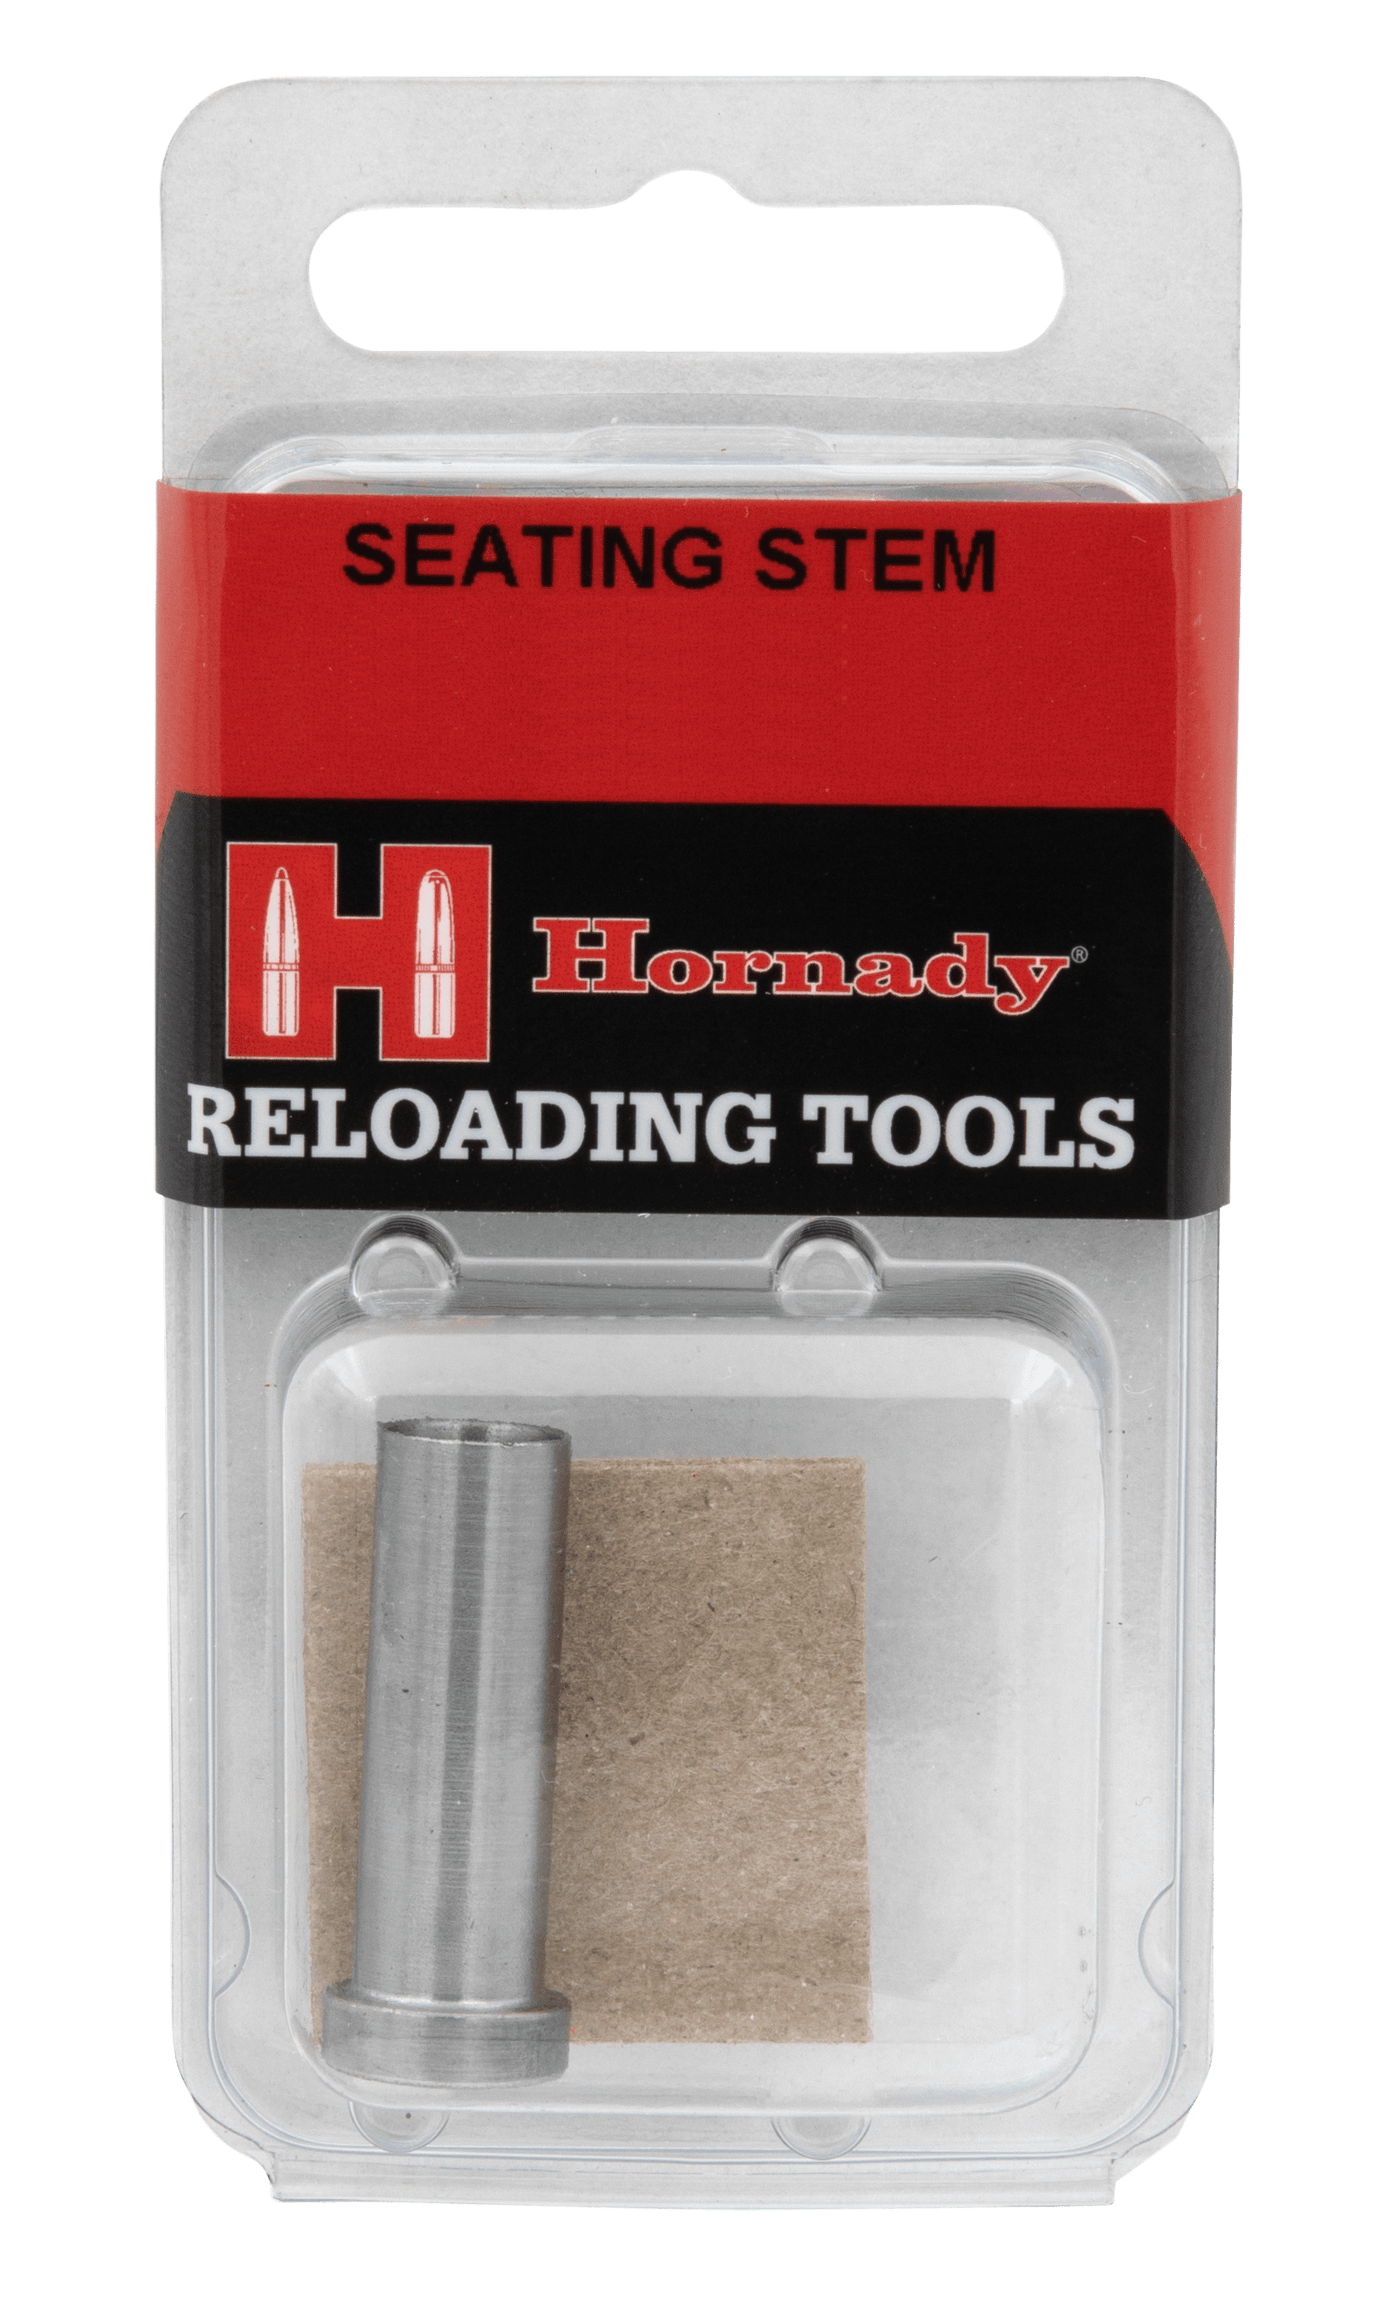 Hornady Hornady A-tip Seating Stem - 338 Cal .338 300gr. Reloading Tools